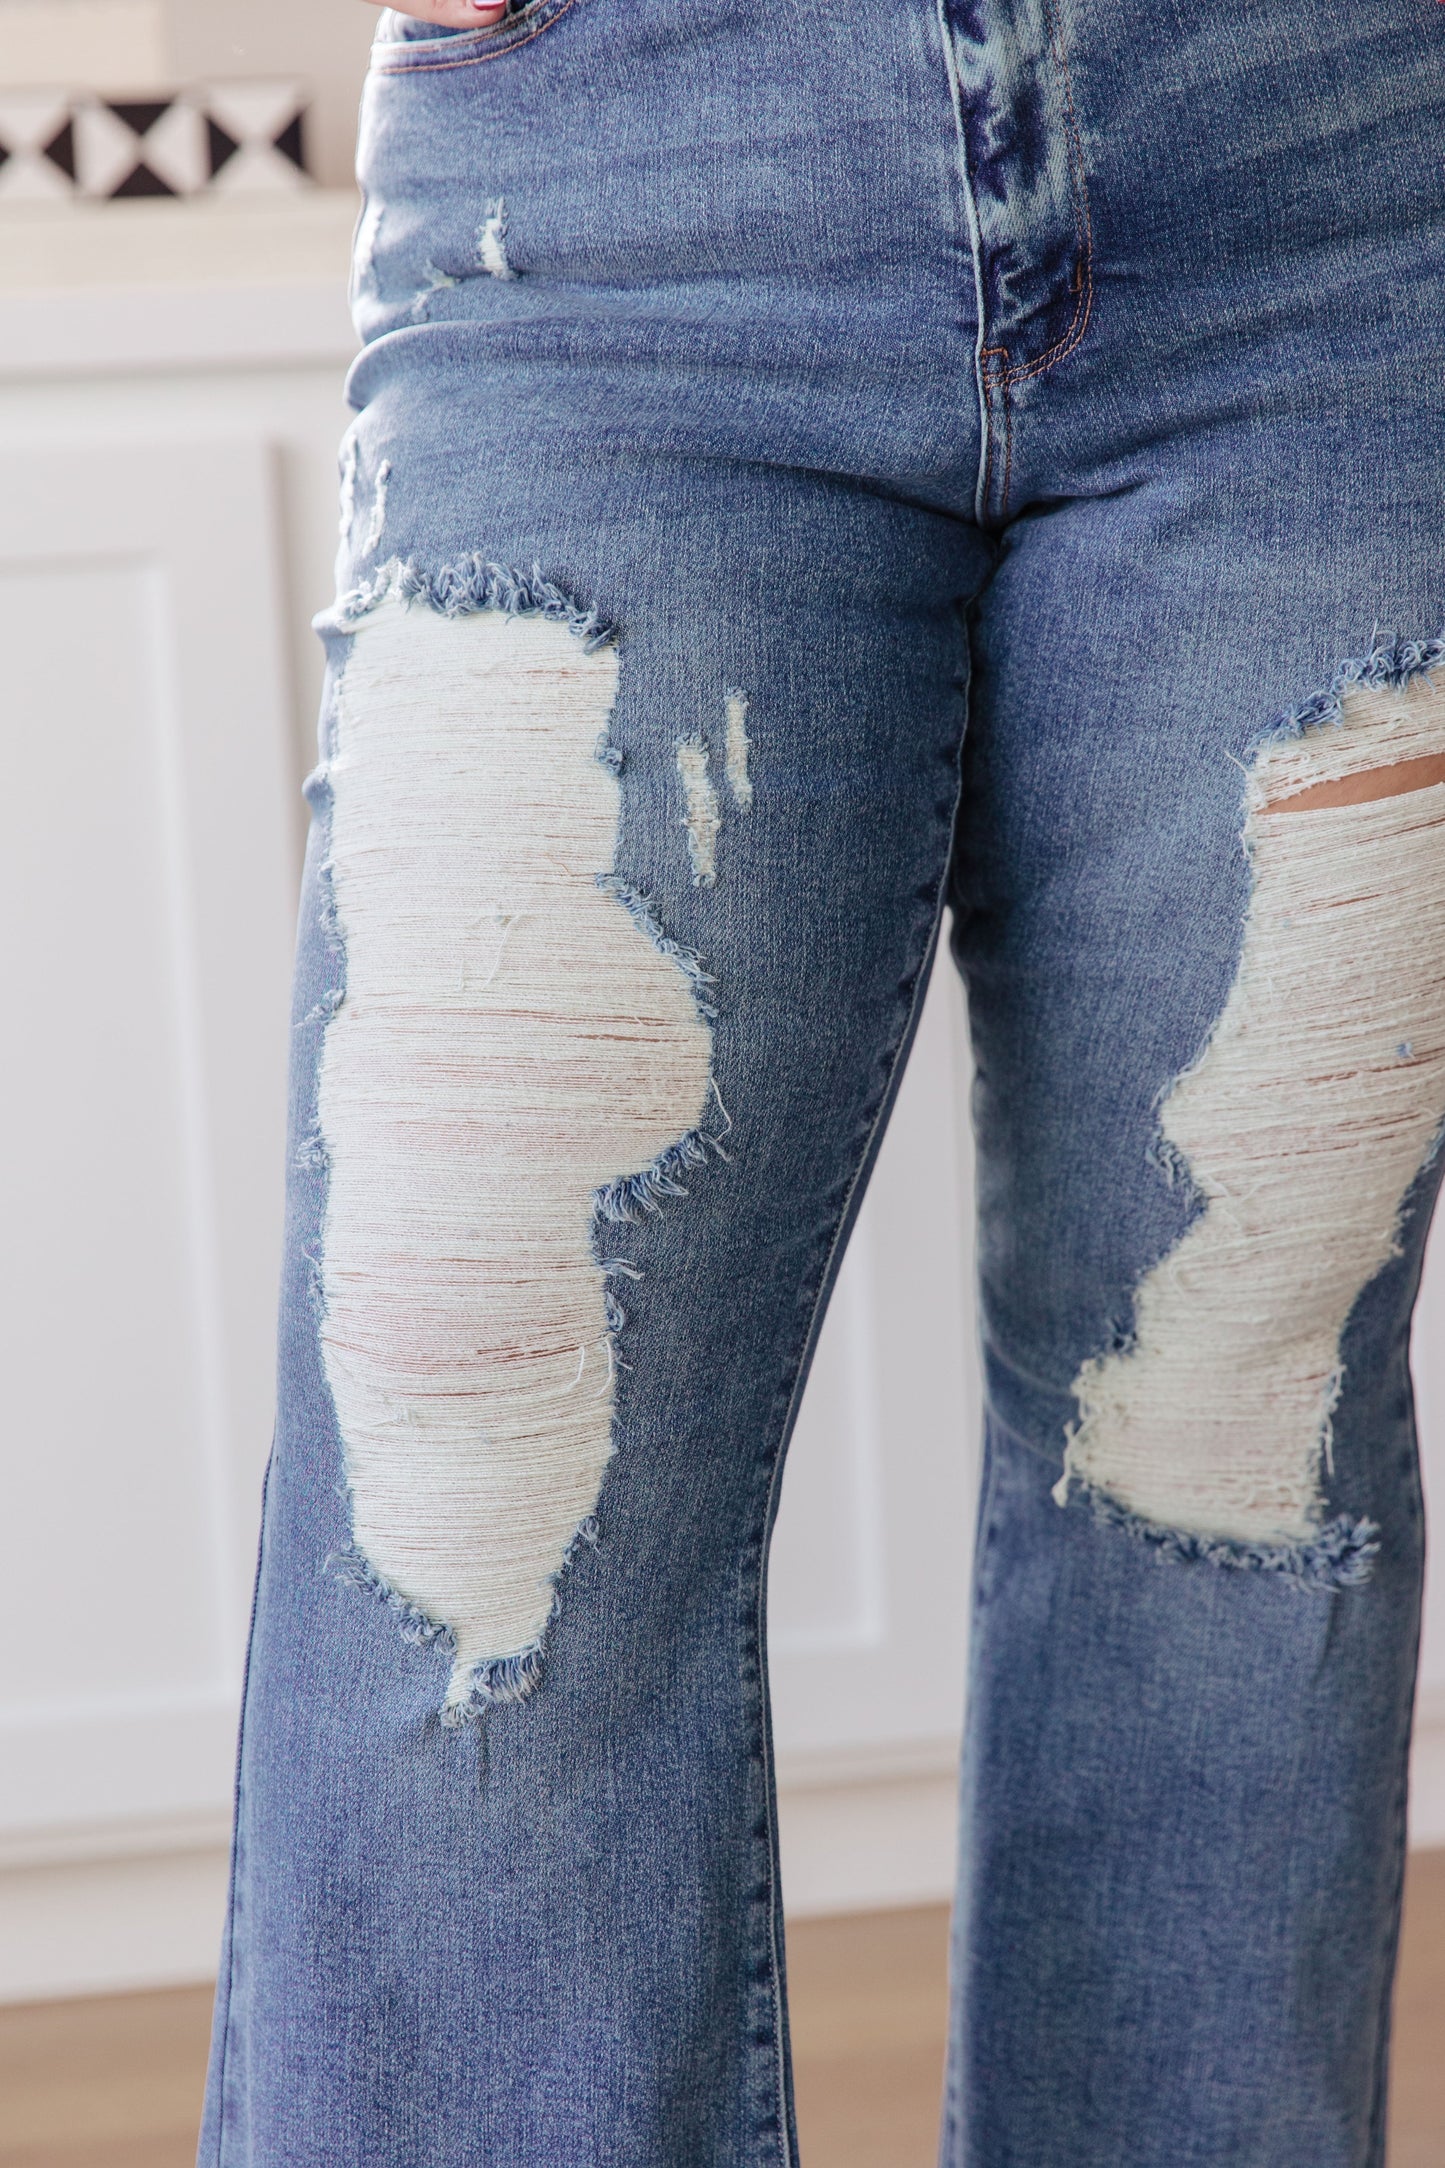 If you've got a flair for the dramatic, look no further than the Kiana Heavy Destroy Flare Jeans from Judy Blue! These amazing jeans feature a stretchy medium wash denim, that shapes a hi-rise with a five pocket cut, and zipper fly that drops into a heavy distressed leg with a raw flare hem. Pair these amazing jeans with a graphic tee, heeled boots, and a wide brim hat for a cute boho look!